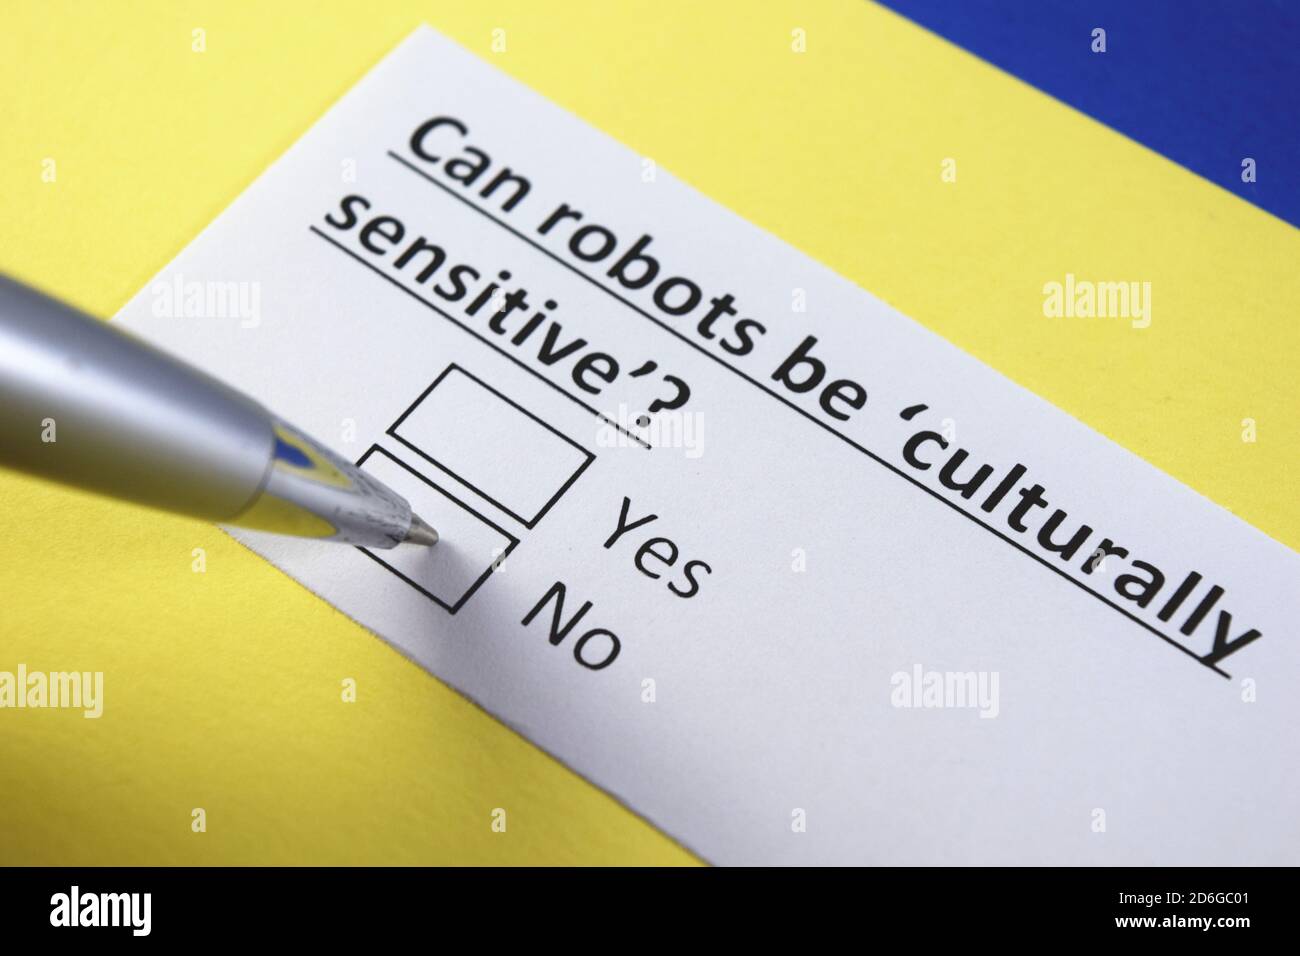 Can robots be 'culturally sensitive'? yes or no? Stock Photo